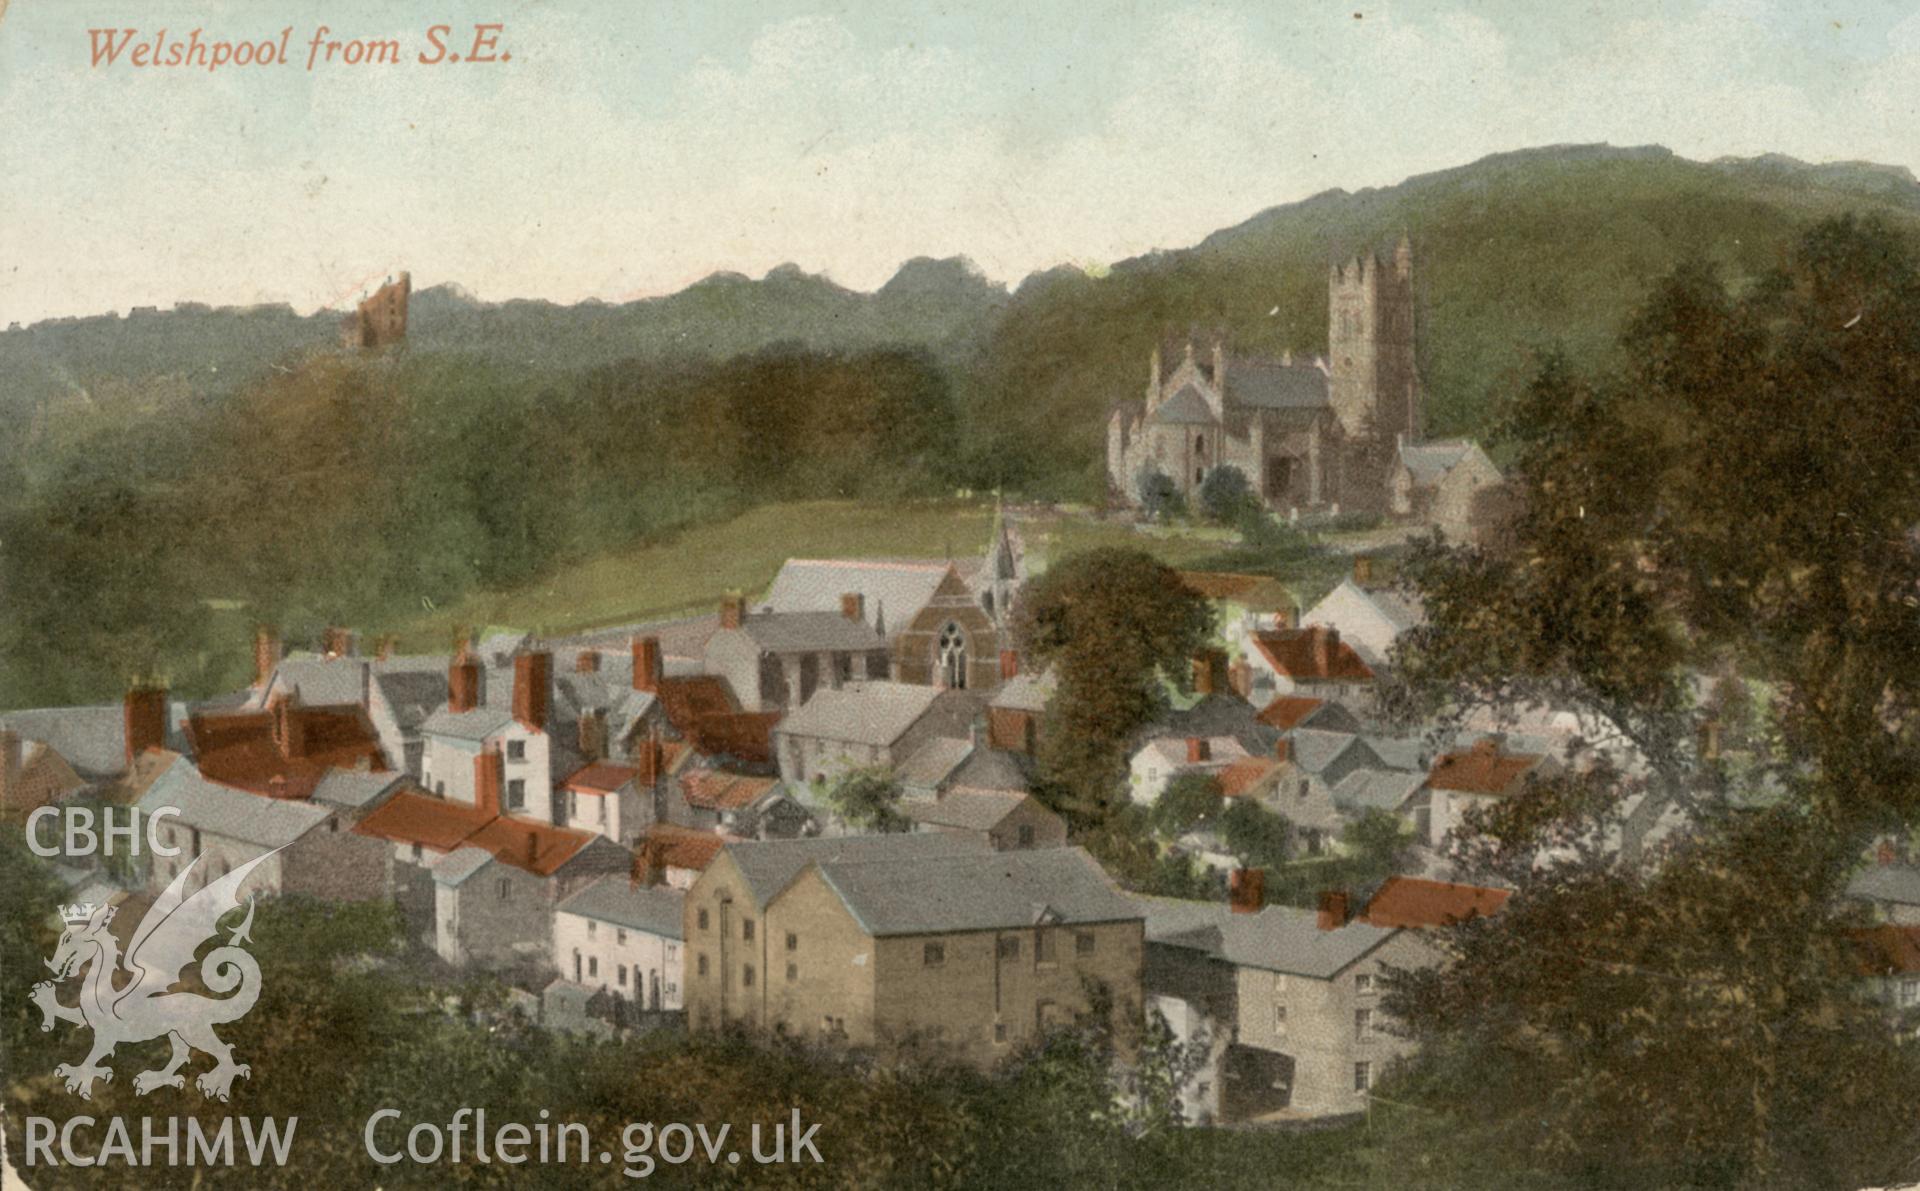 Postcard view of Welshpool with Christ Church in the background.